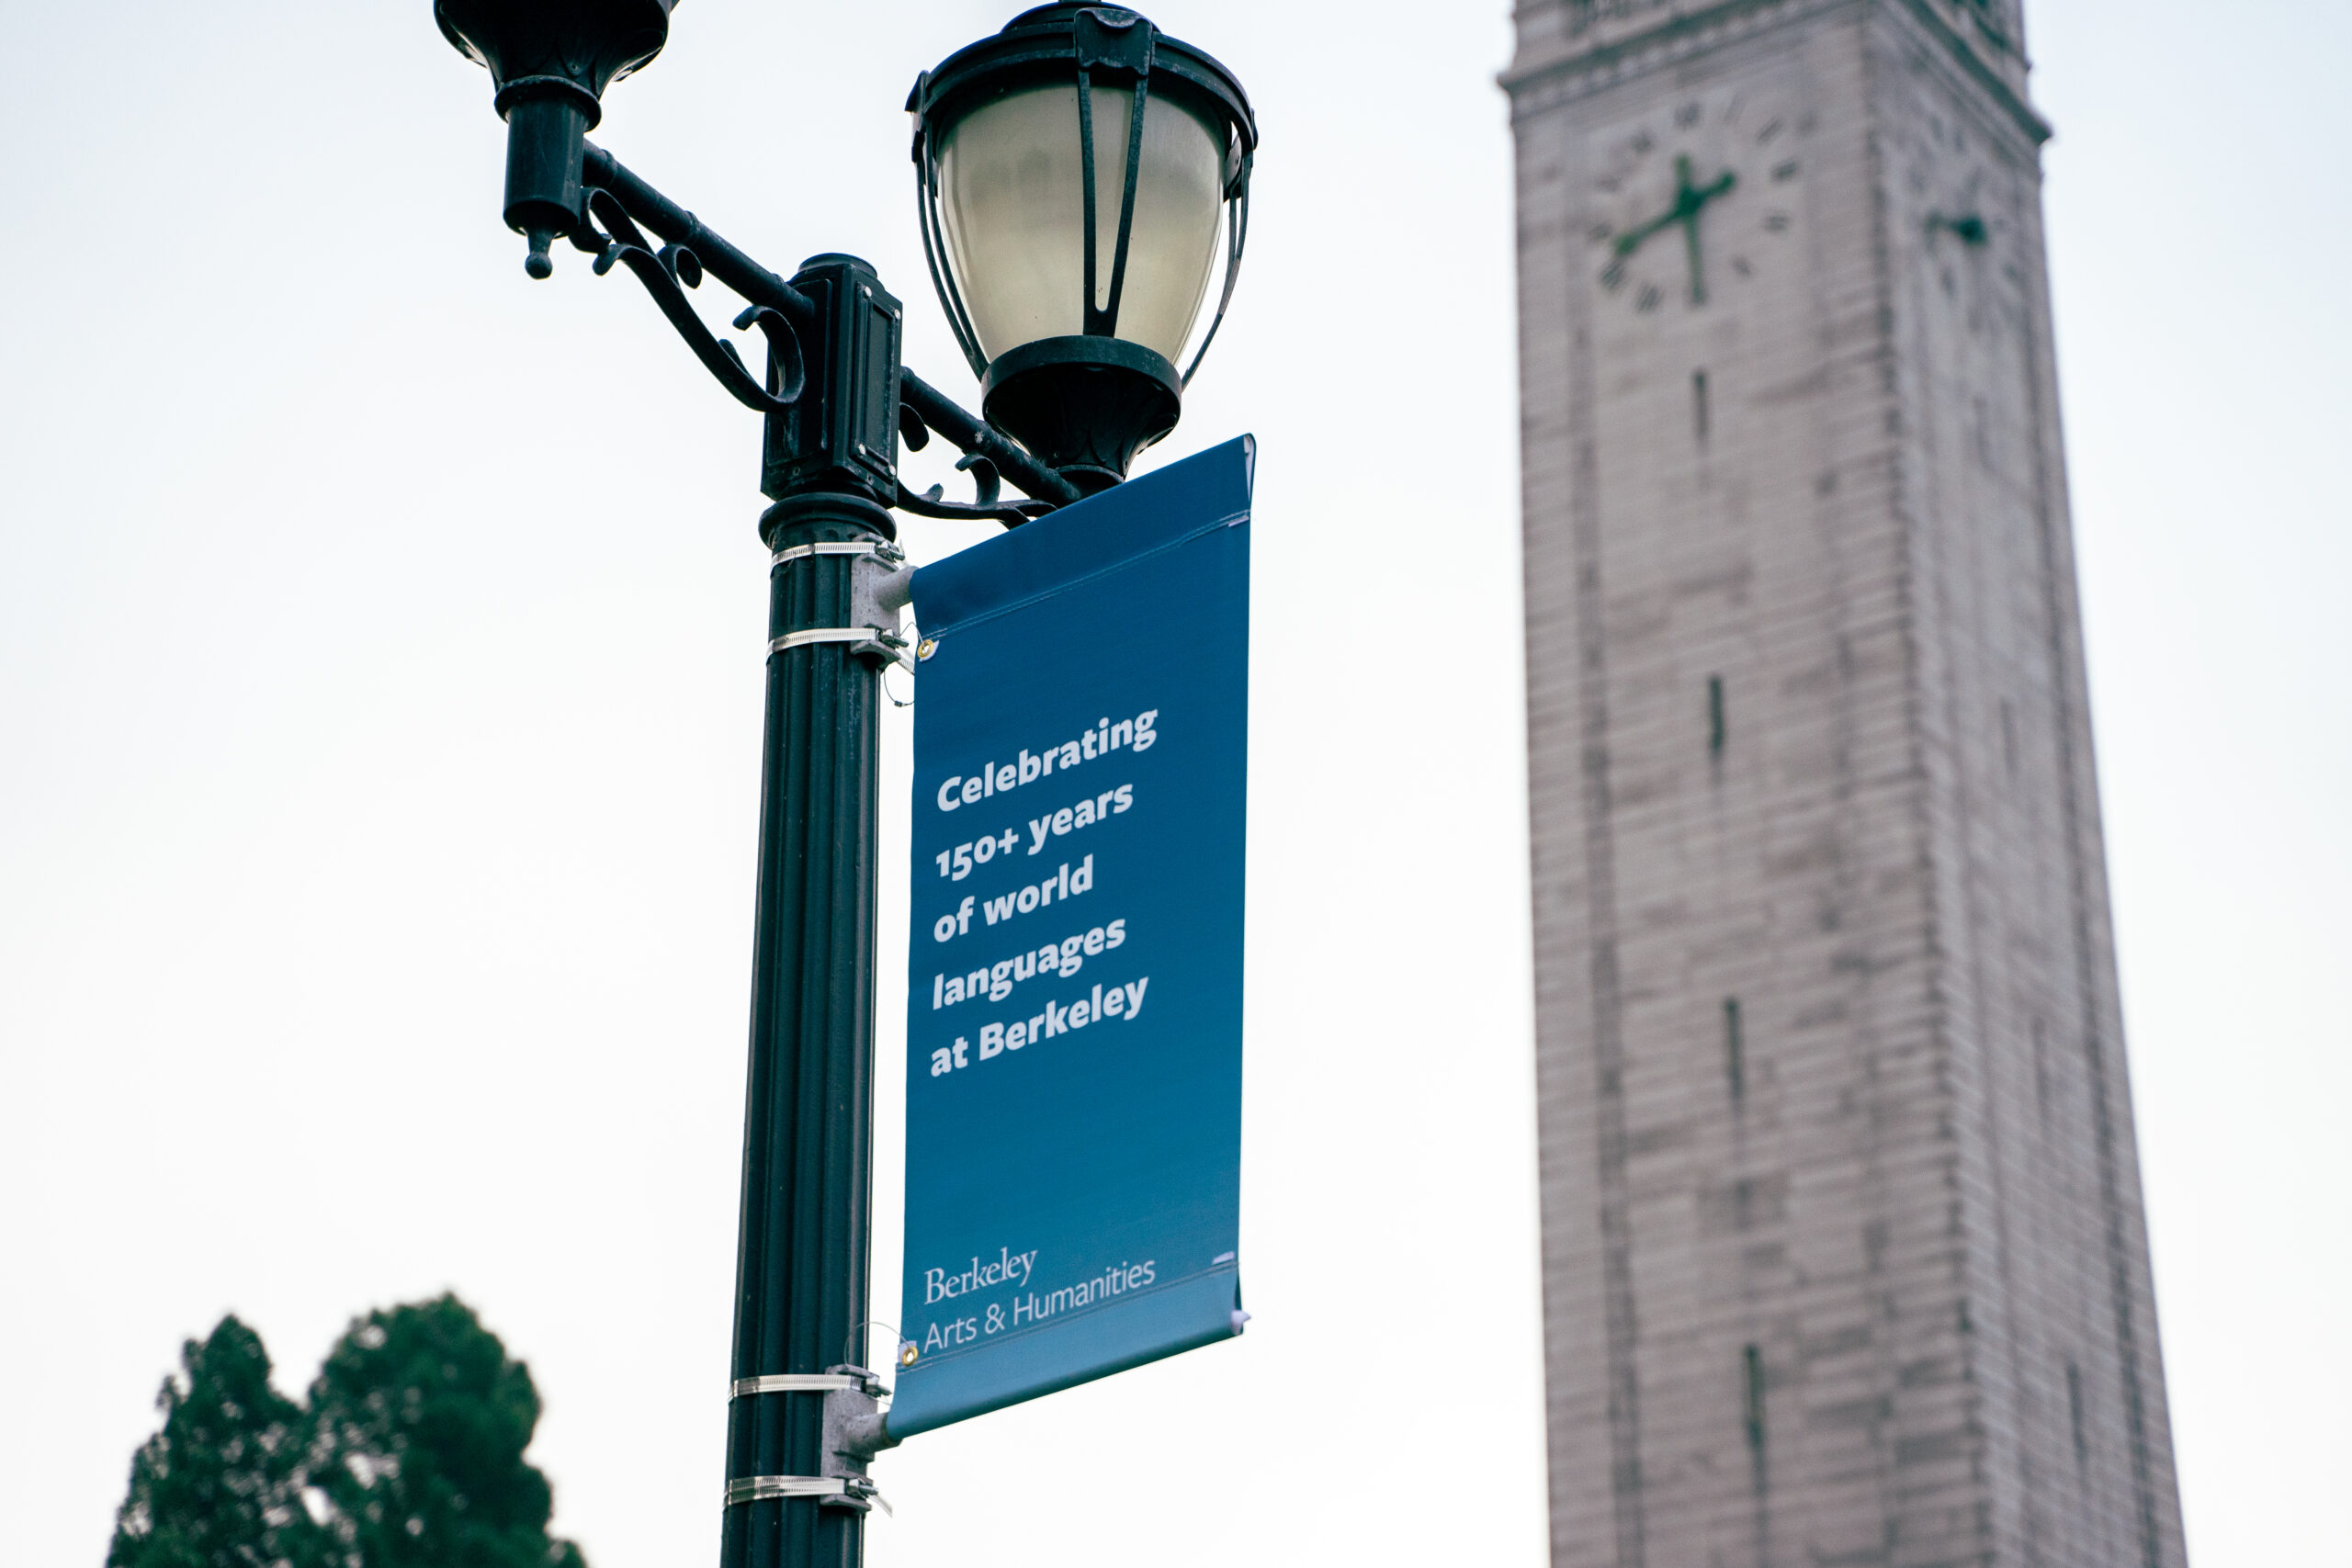 A dark blue banner hanging on a light pole near the Campanile says 